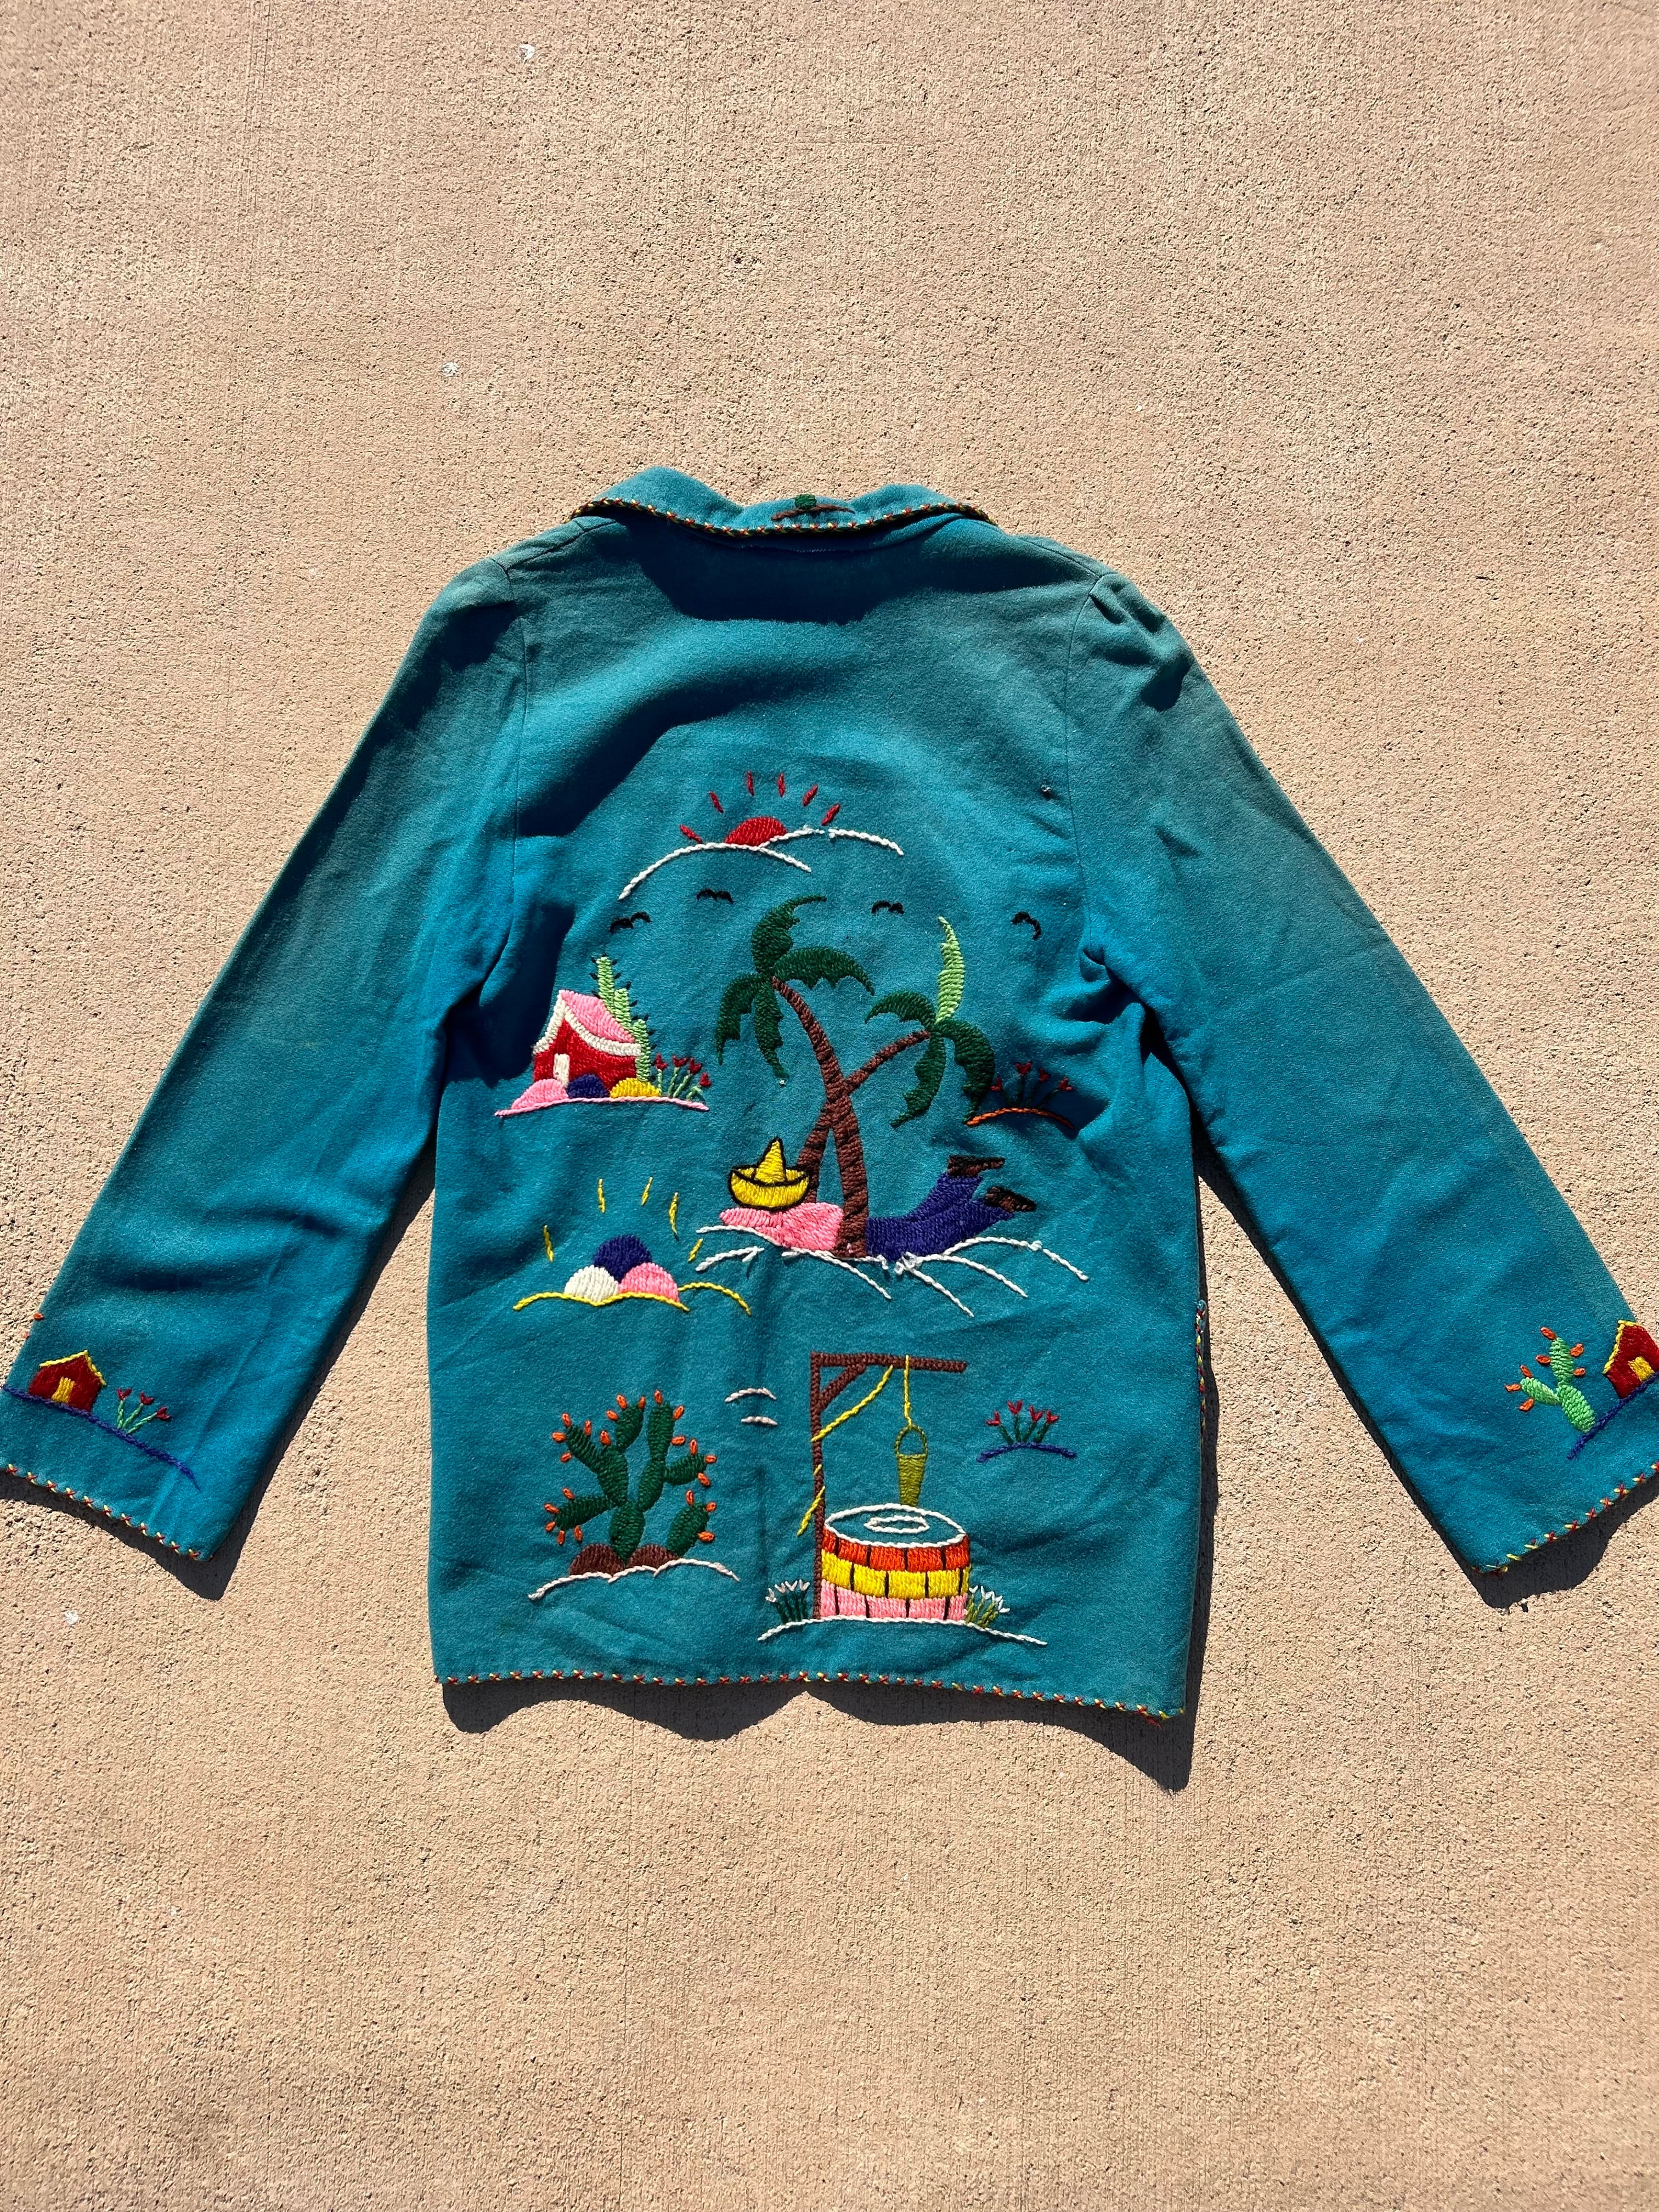 Vintage Mexican Turquoise Blue Jacket / ヴィンテージ